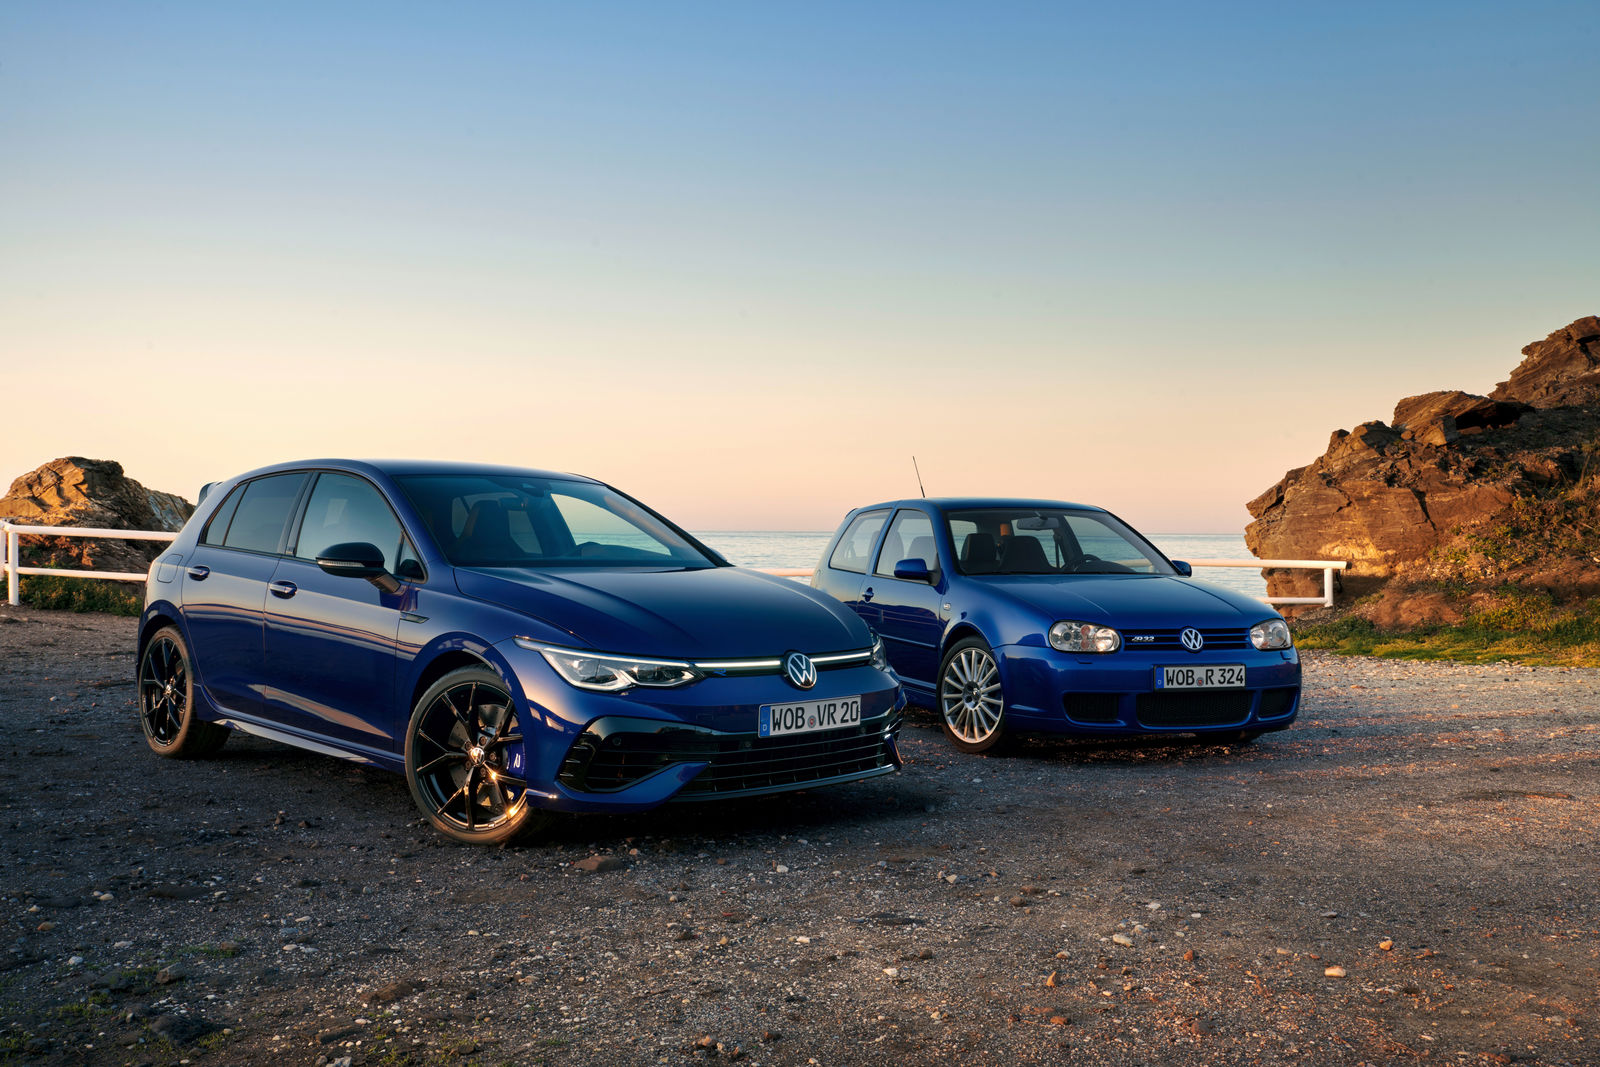 Golf R “20 Years” – anniversary model of the Golf R now available